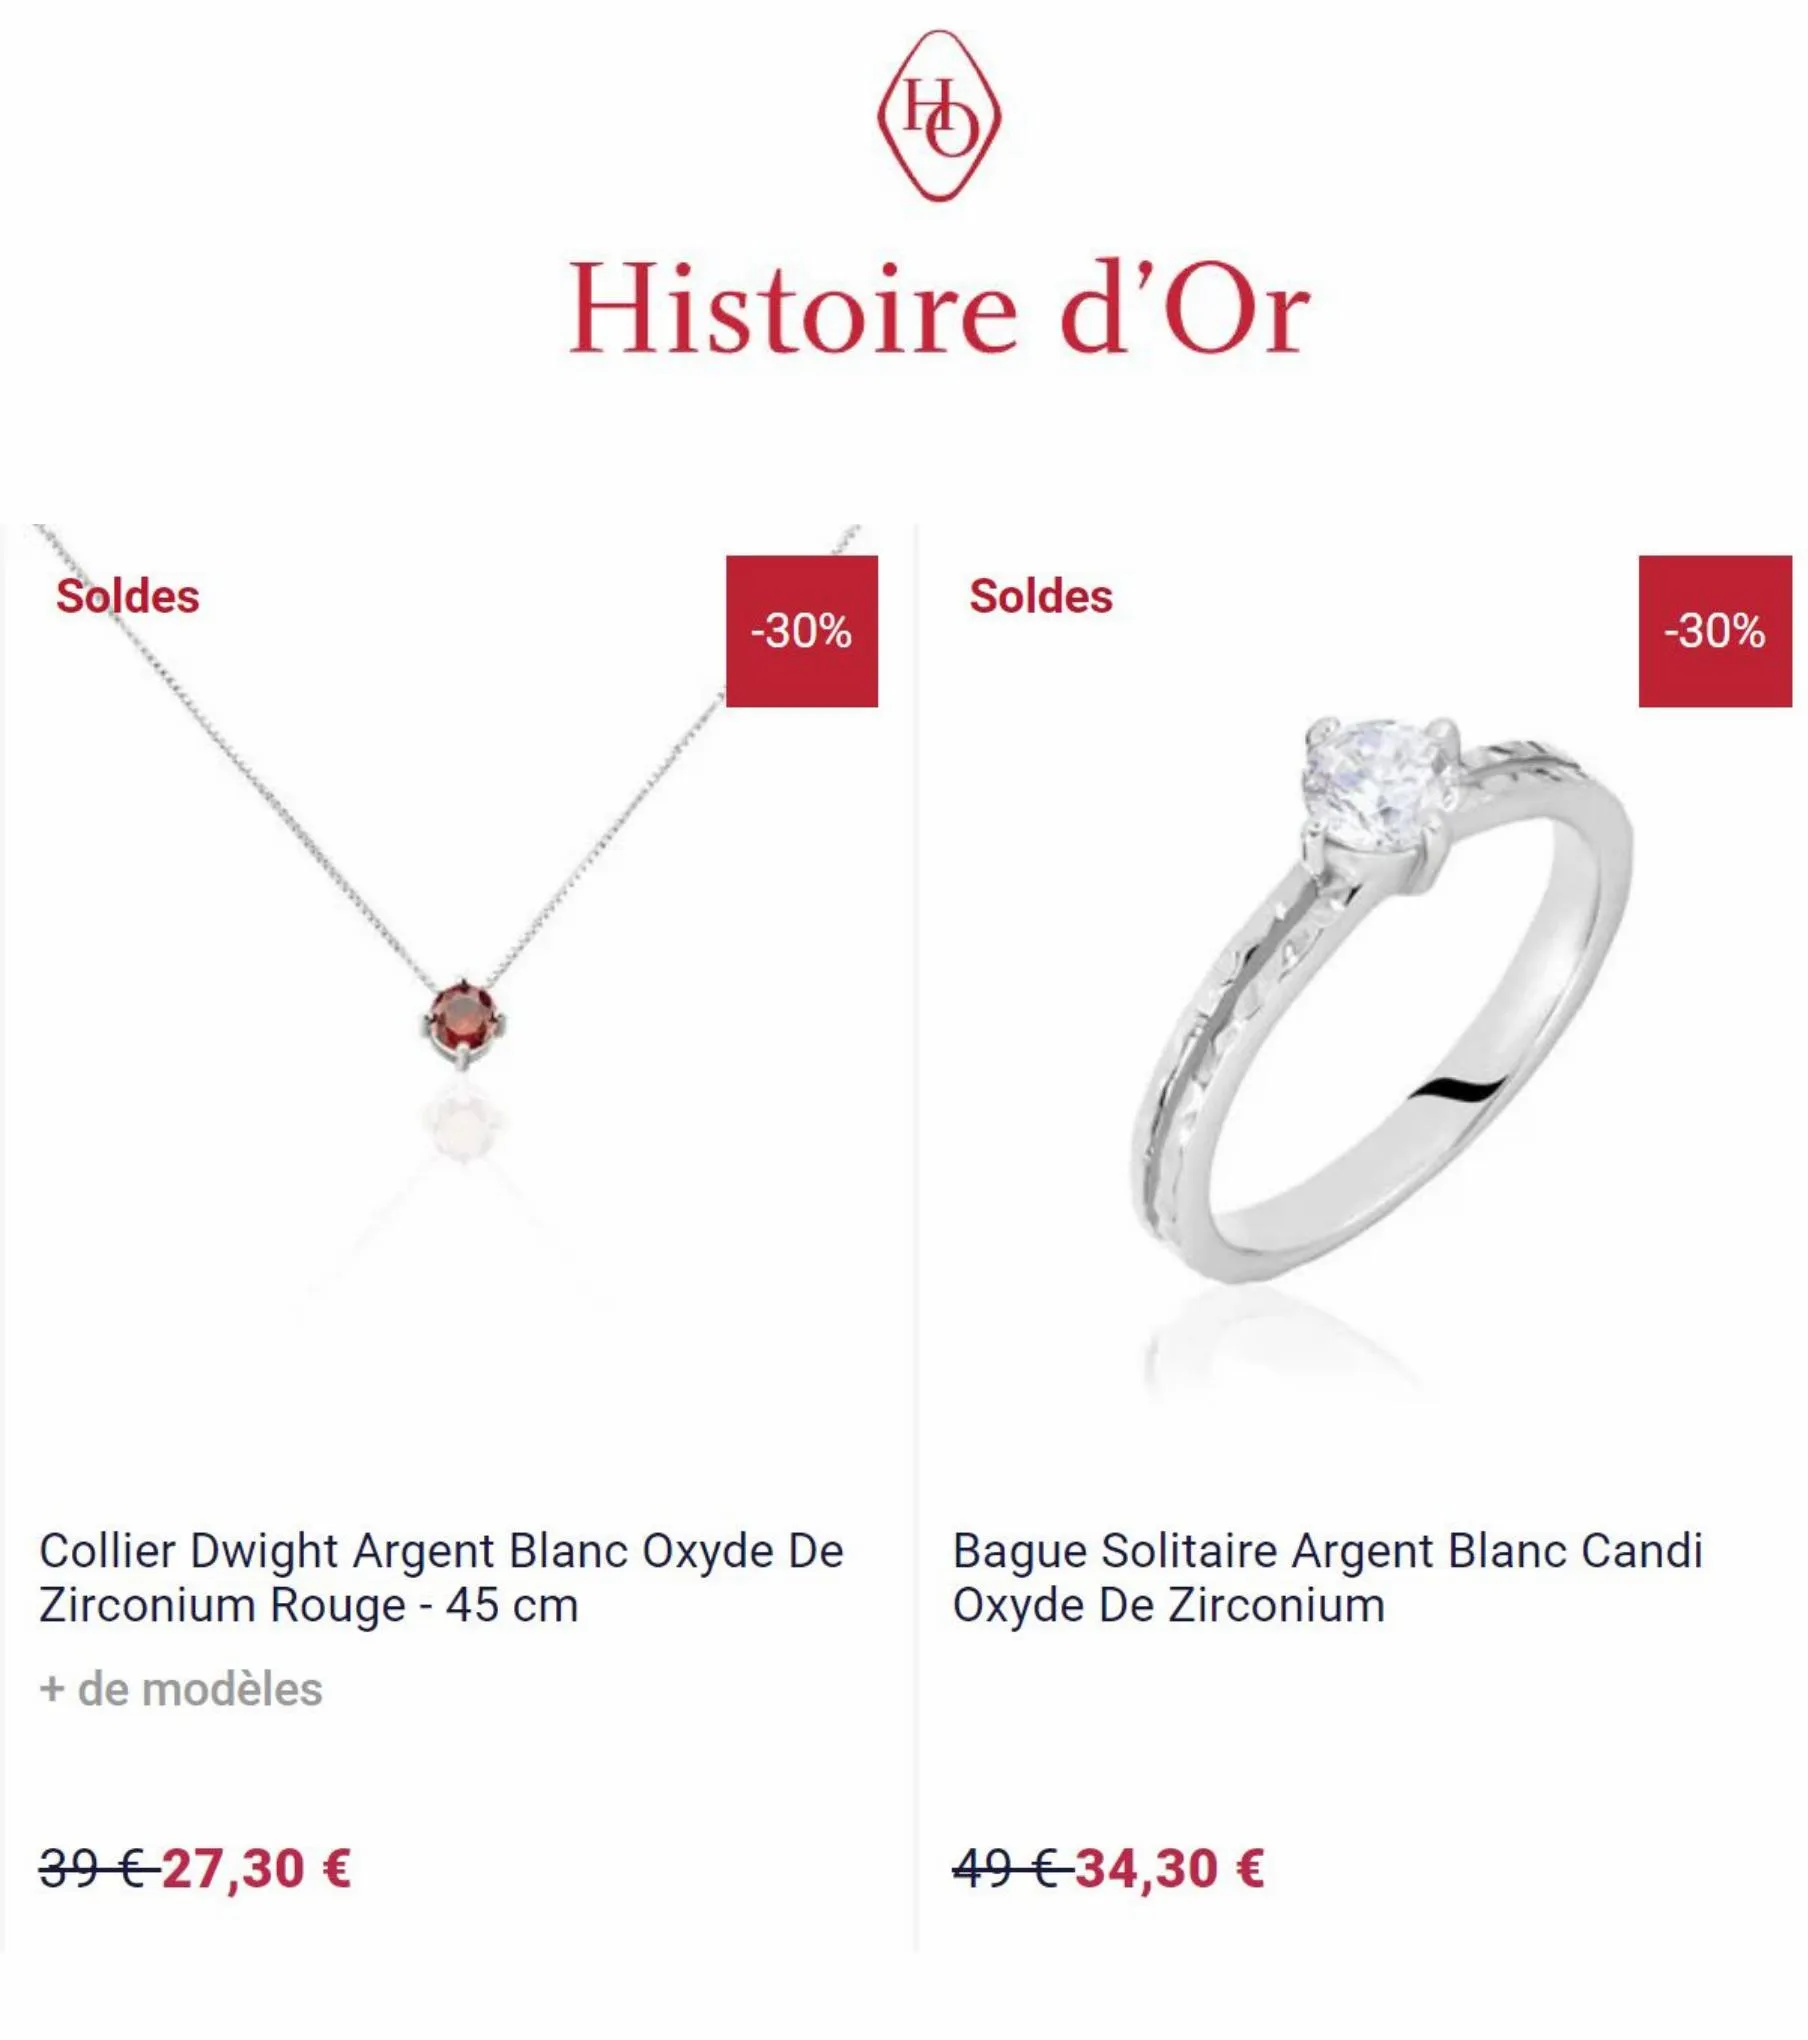 Catalogue Soldes Histoire d'Or, page 00003